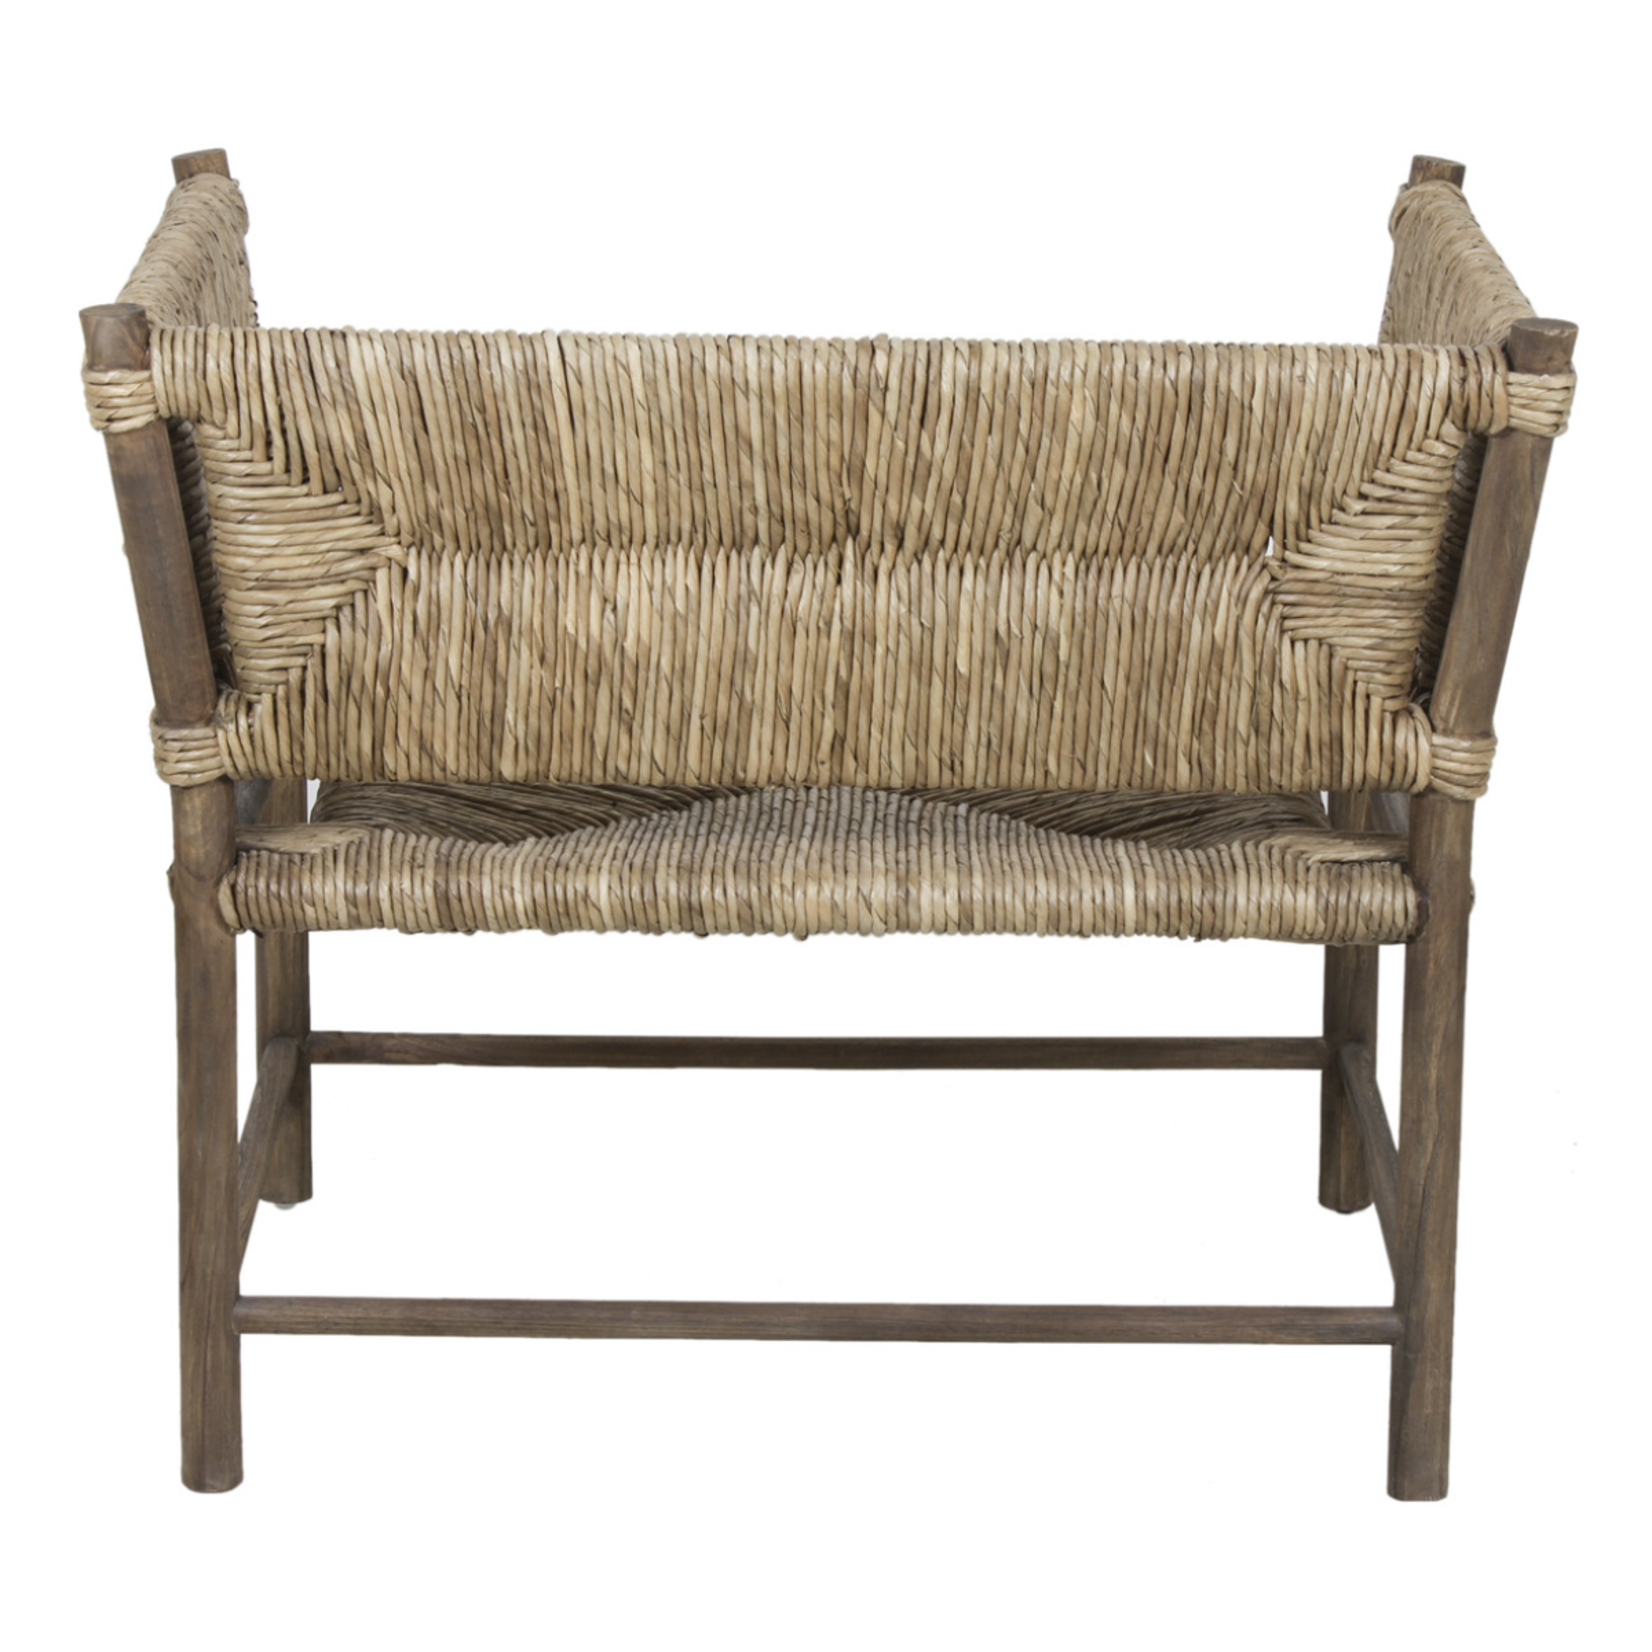 Outside The Box Wide Woven Seagrass & Mindi Wood Occasional Chair